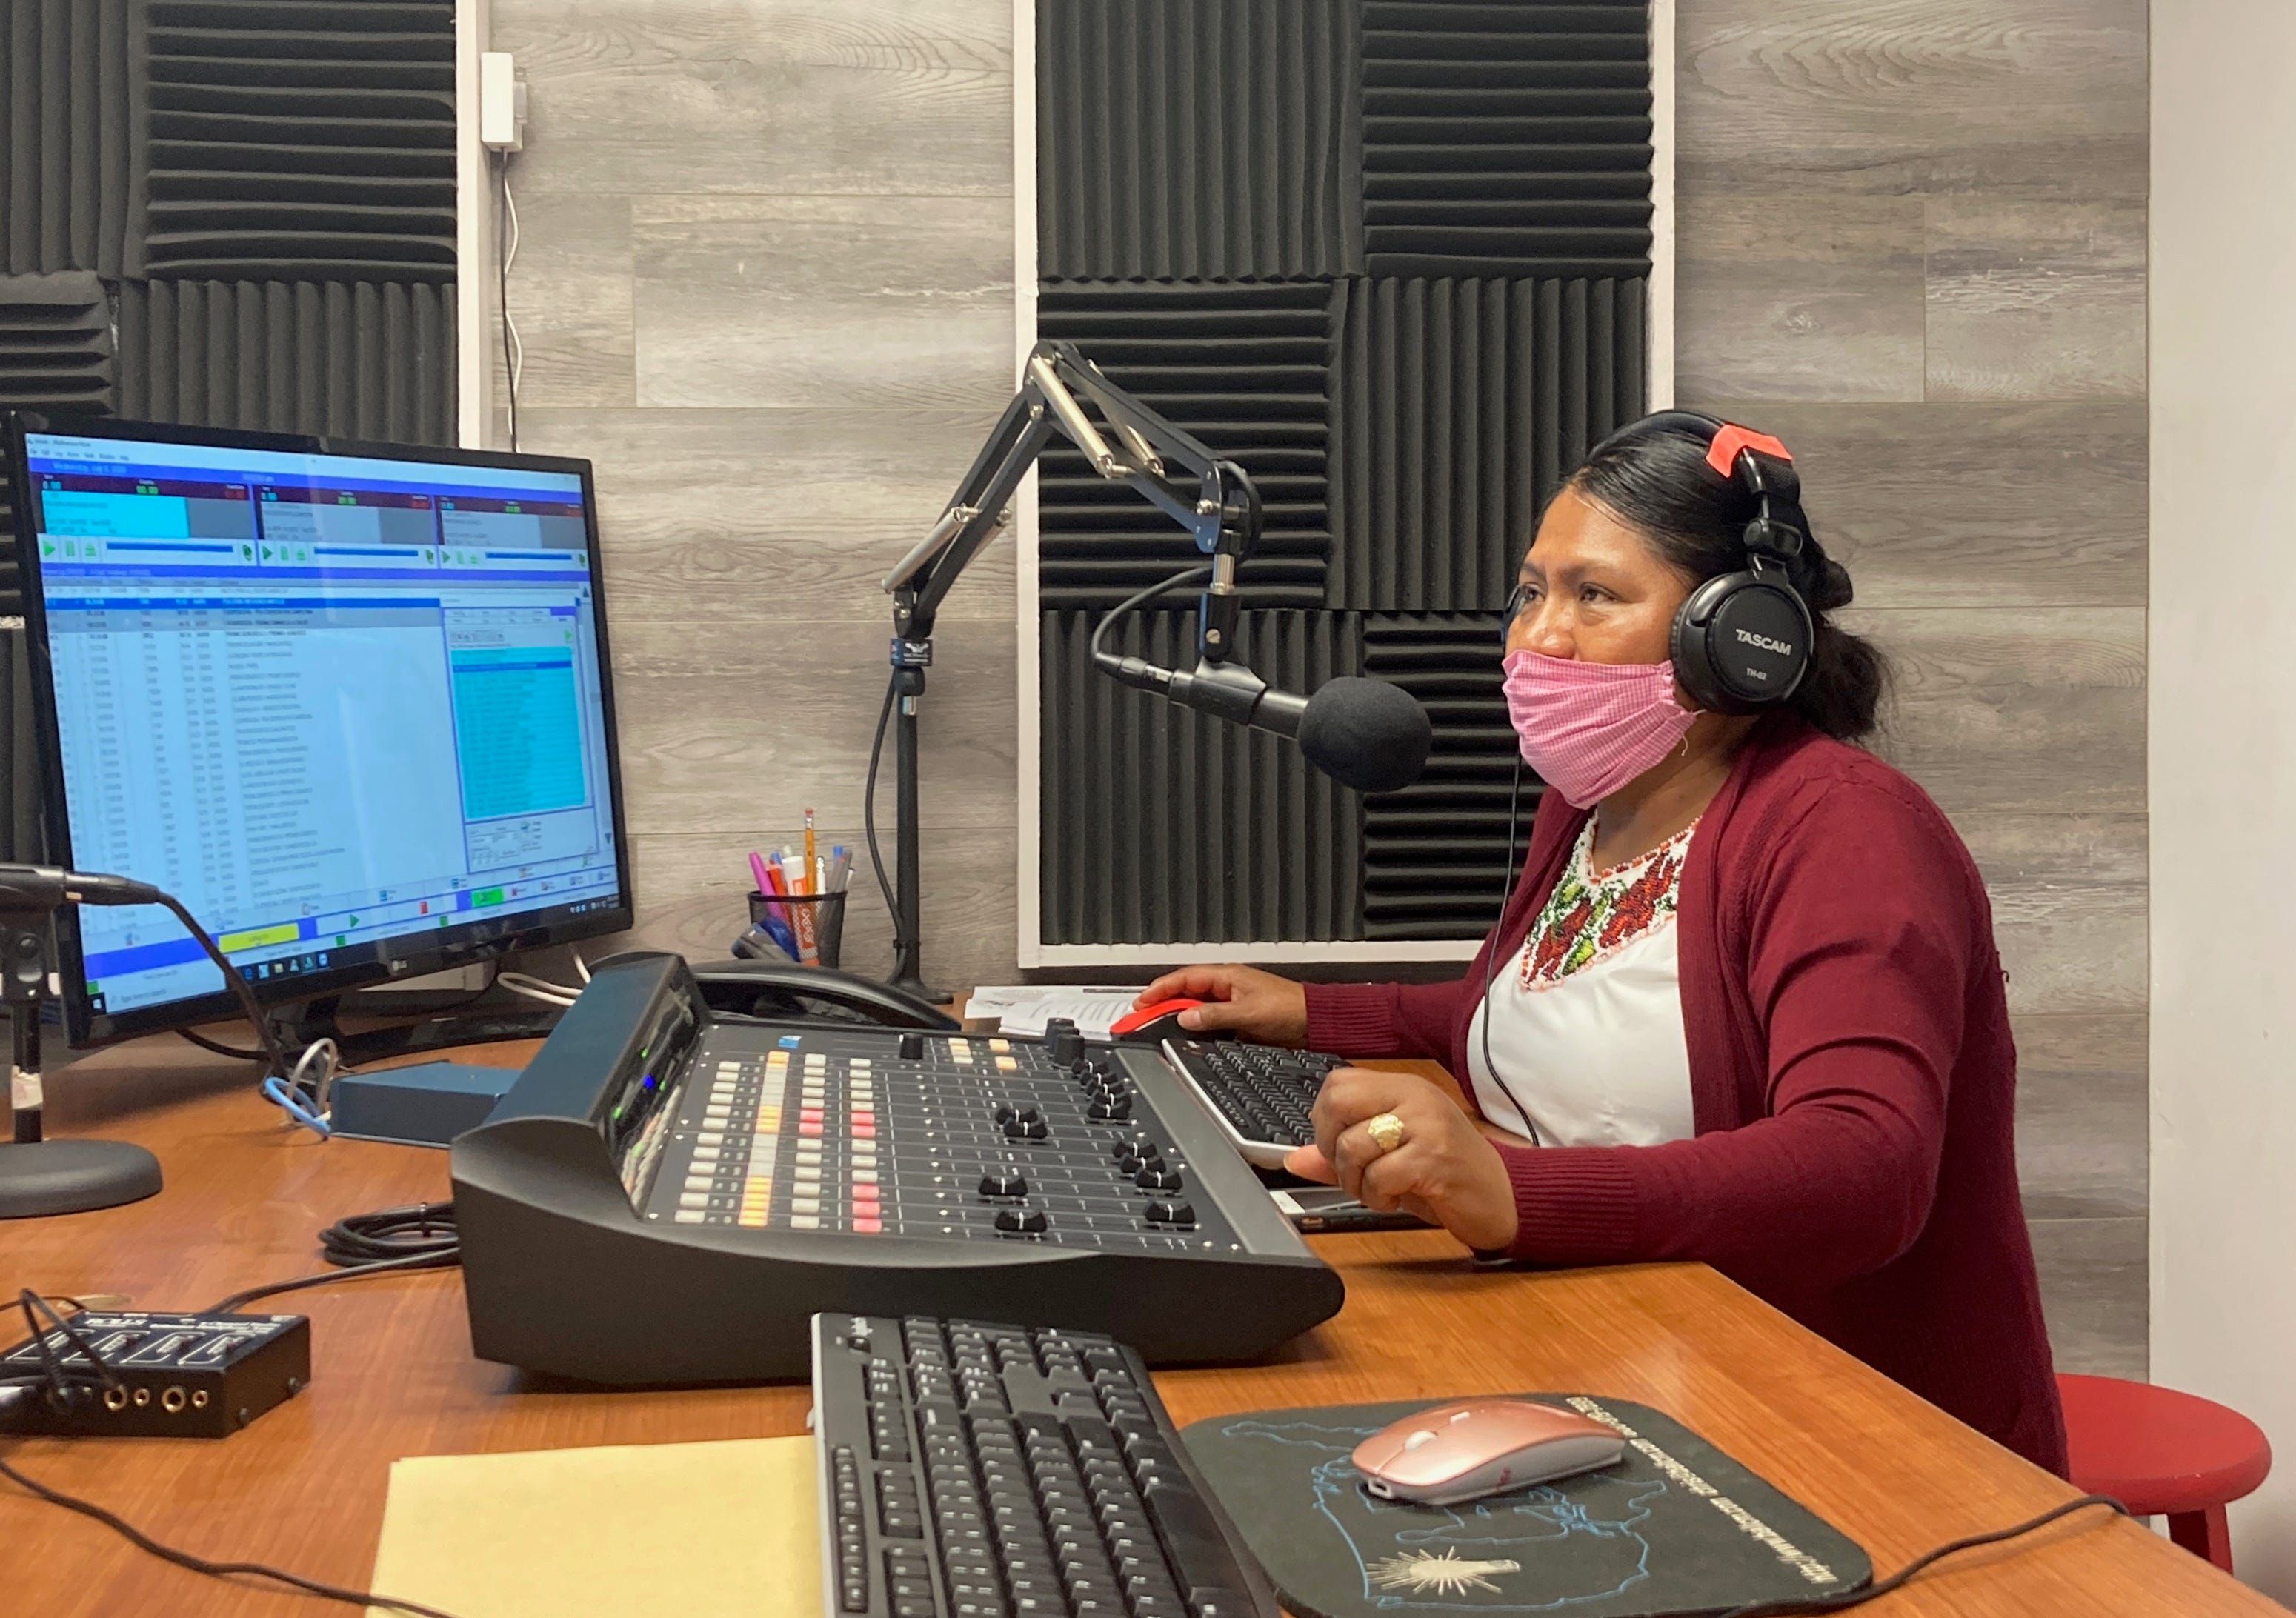 Lidia López prepares to go on-air from Radio Indígena's programming booth in Oxnard in July. Image by Julia Knoerr. United States, 2020.